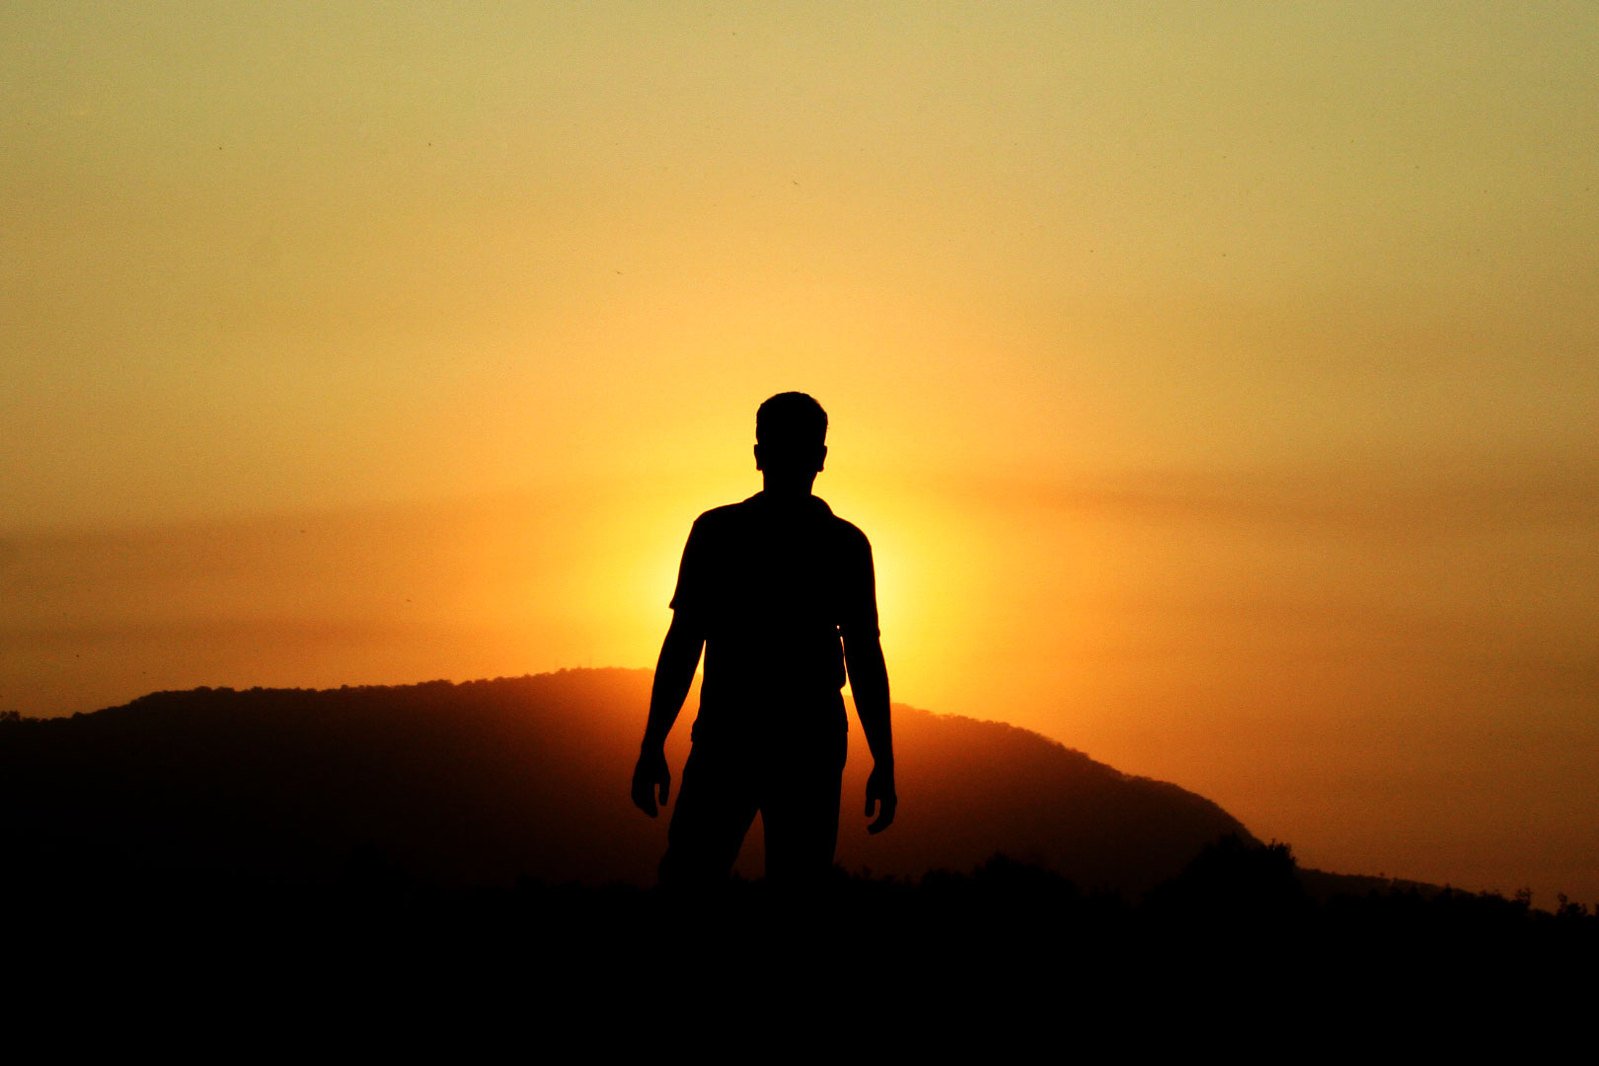 the silhouette of a man standing at sunset